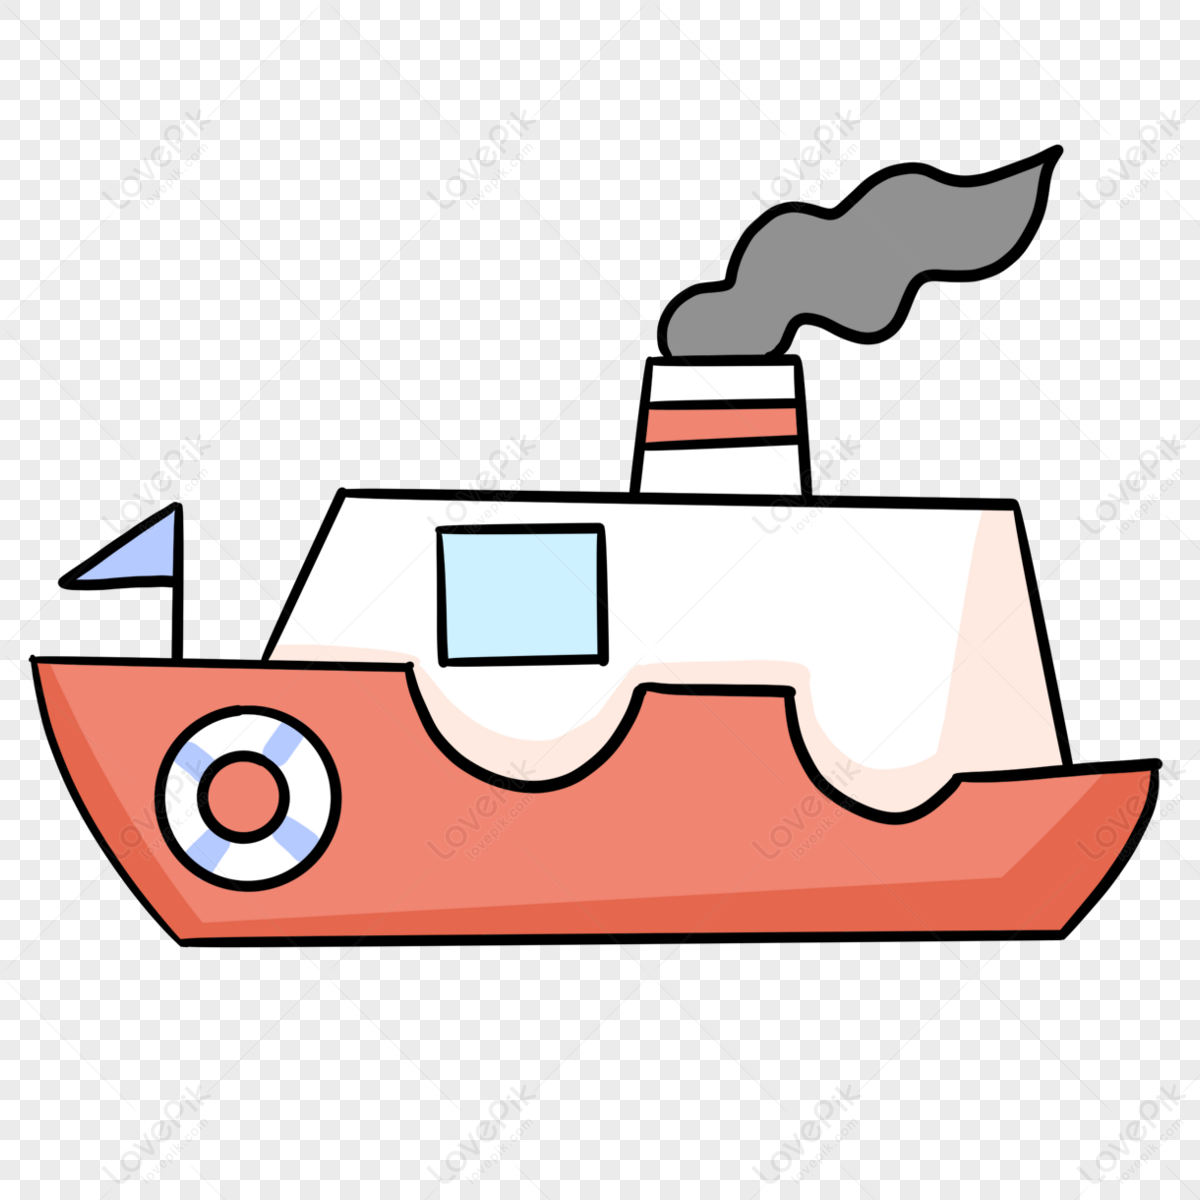 Medieval Ship Icon Black Color Vector Illustration Flat Style Simple Image  Royalty Free SVG, Cliparts, Vectors, and Stock Illustration. Image  103367556.